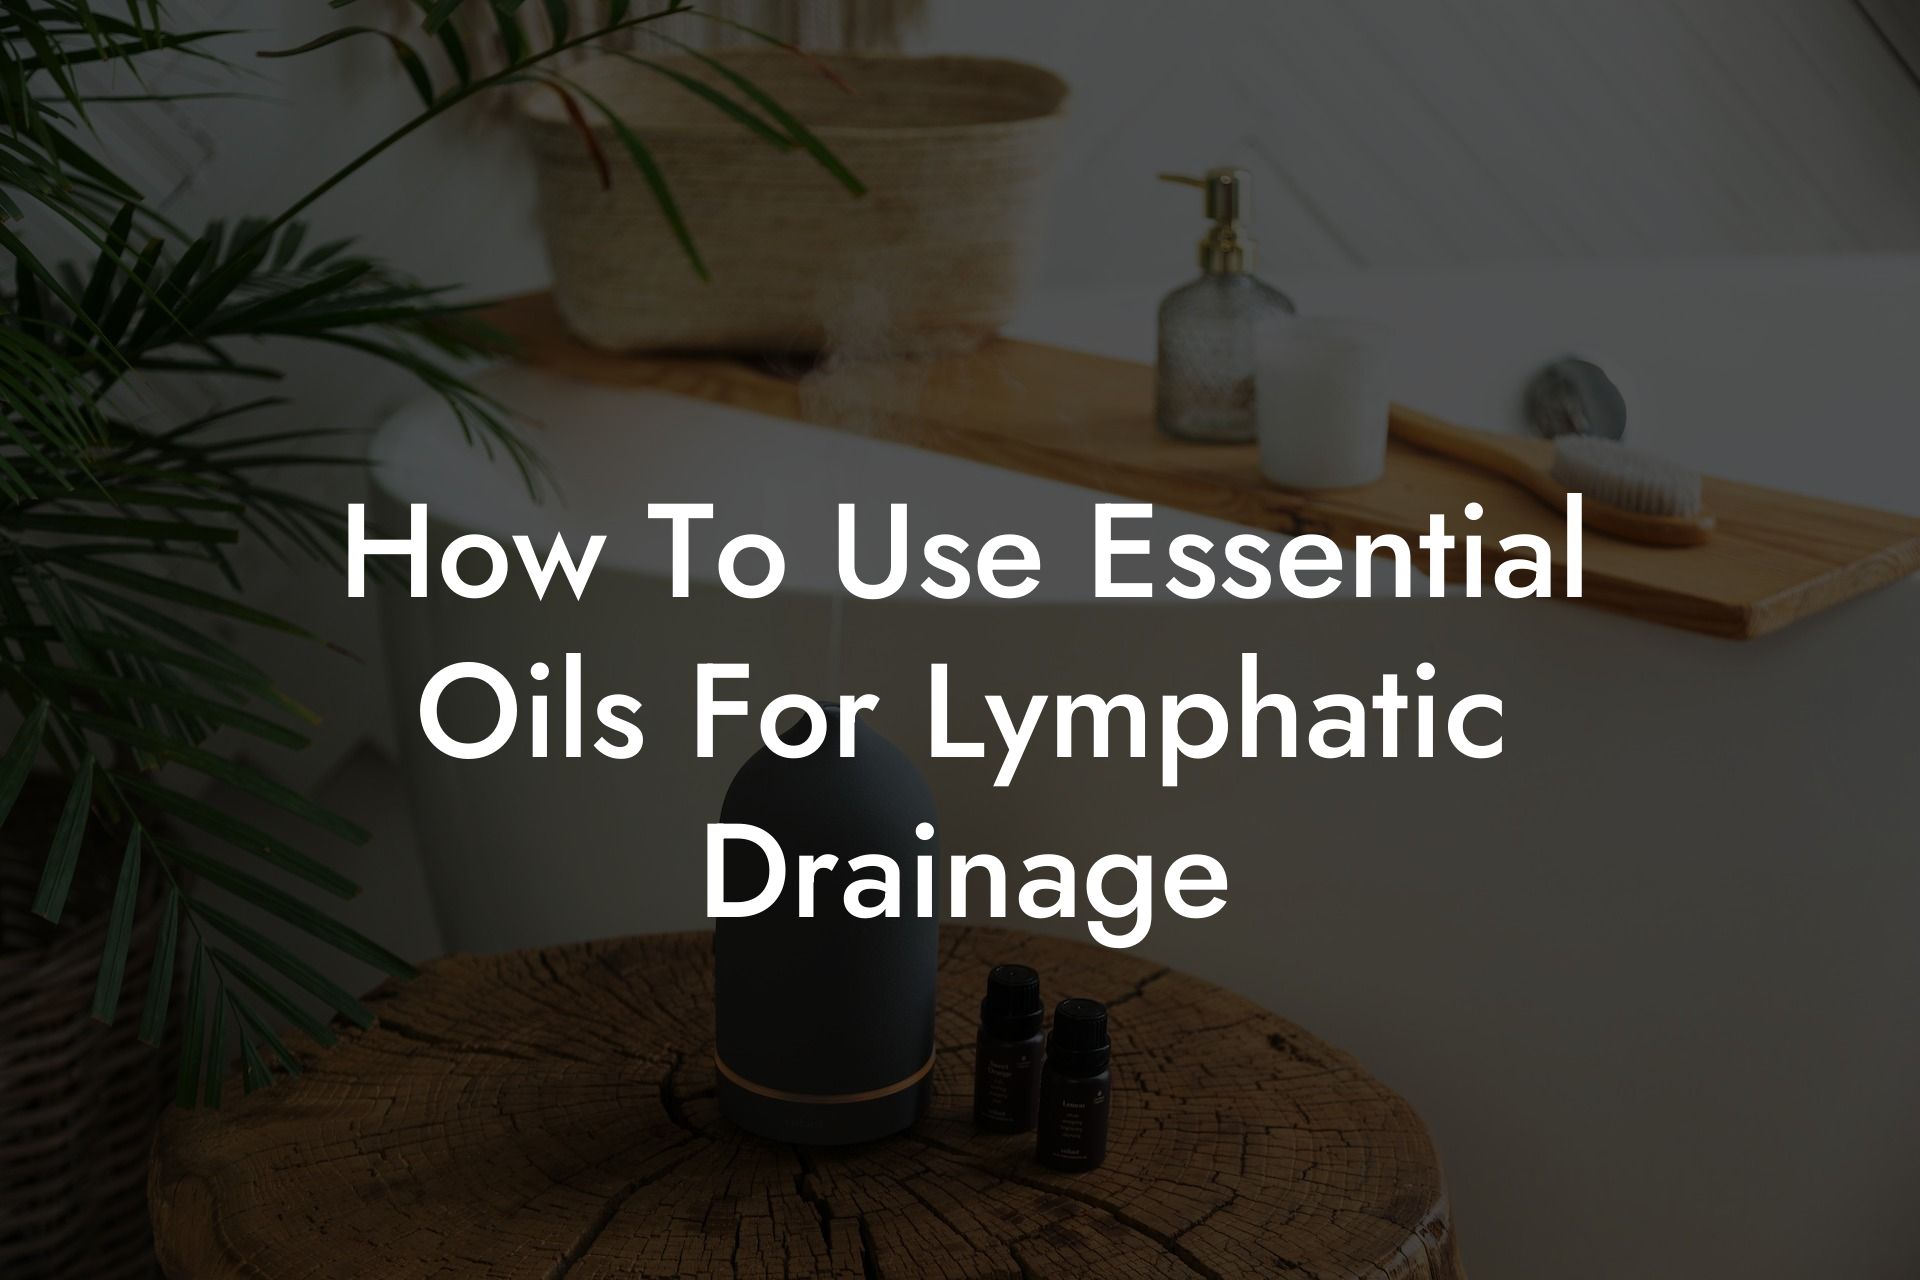 How To Use Essential Oils For Lymphatic Drainage